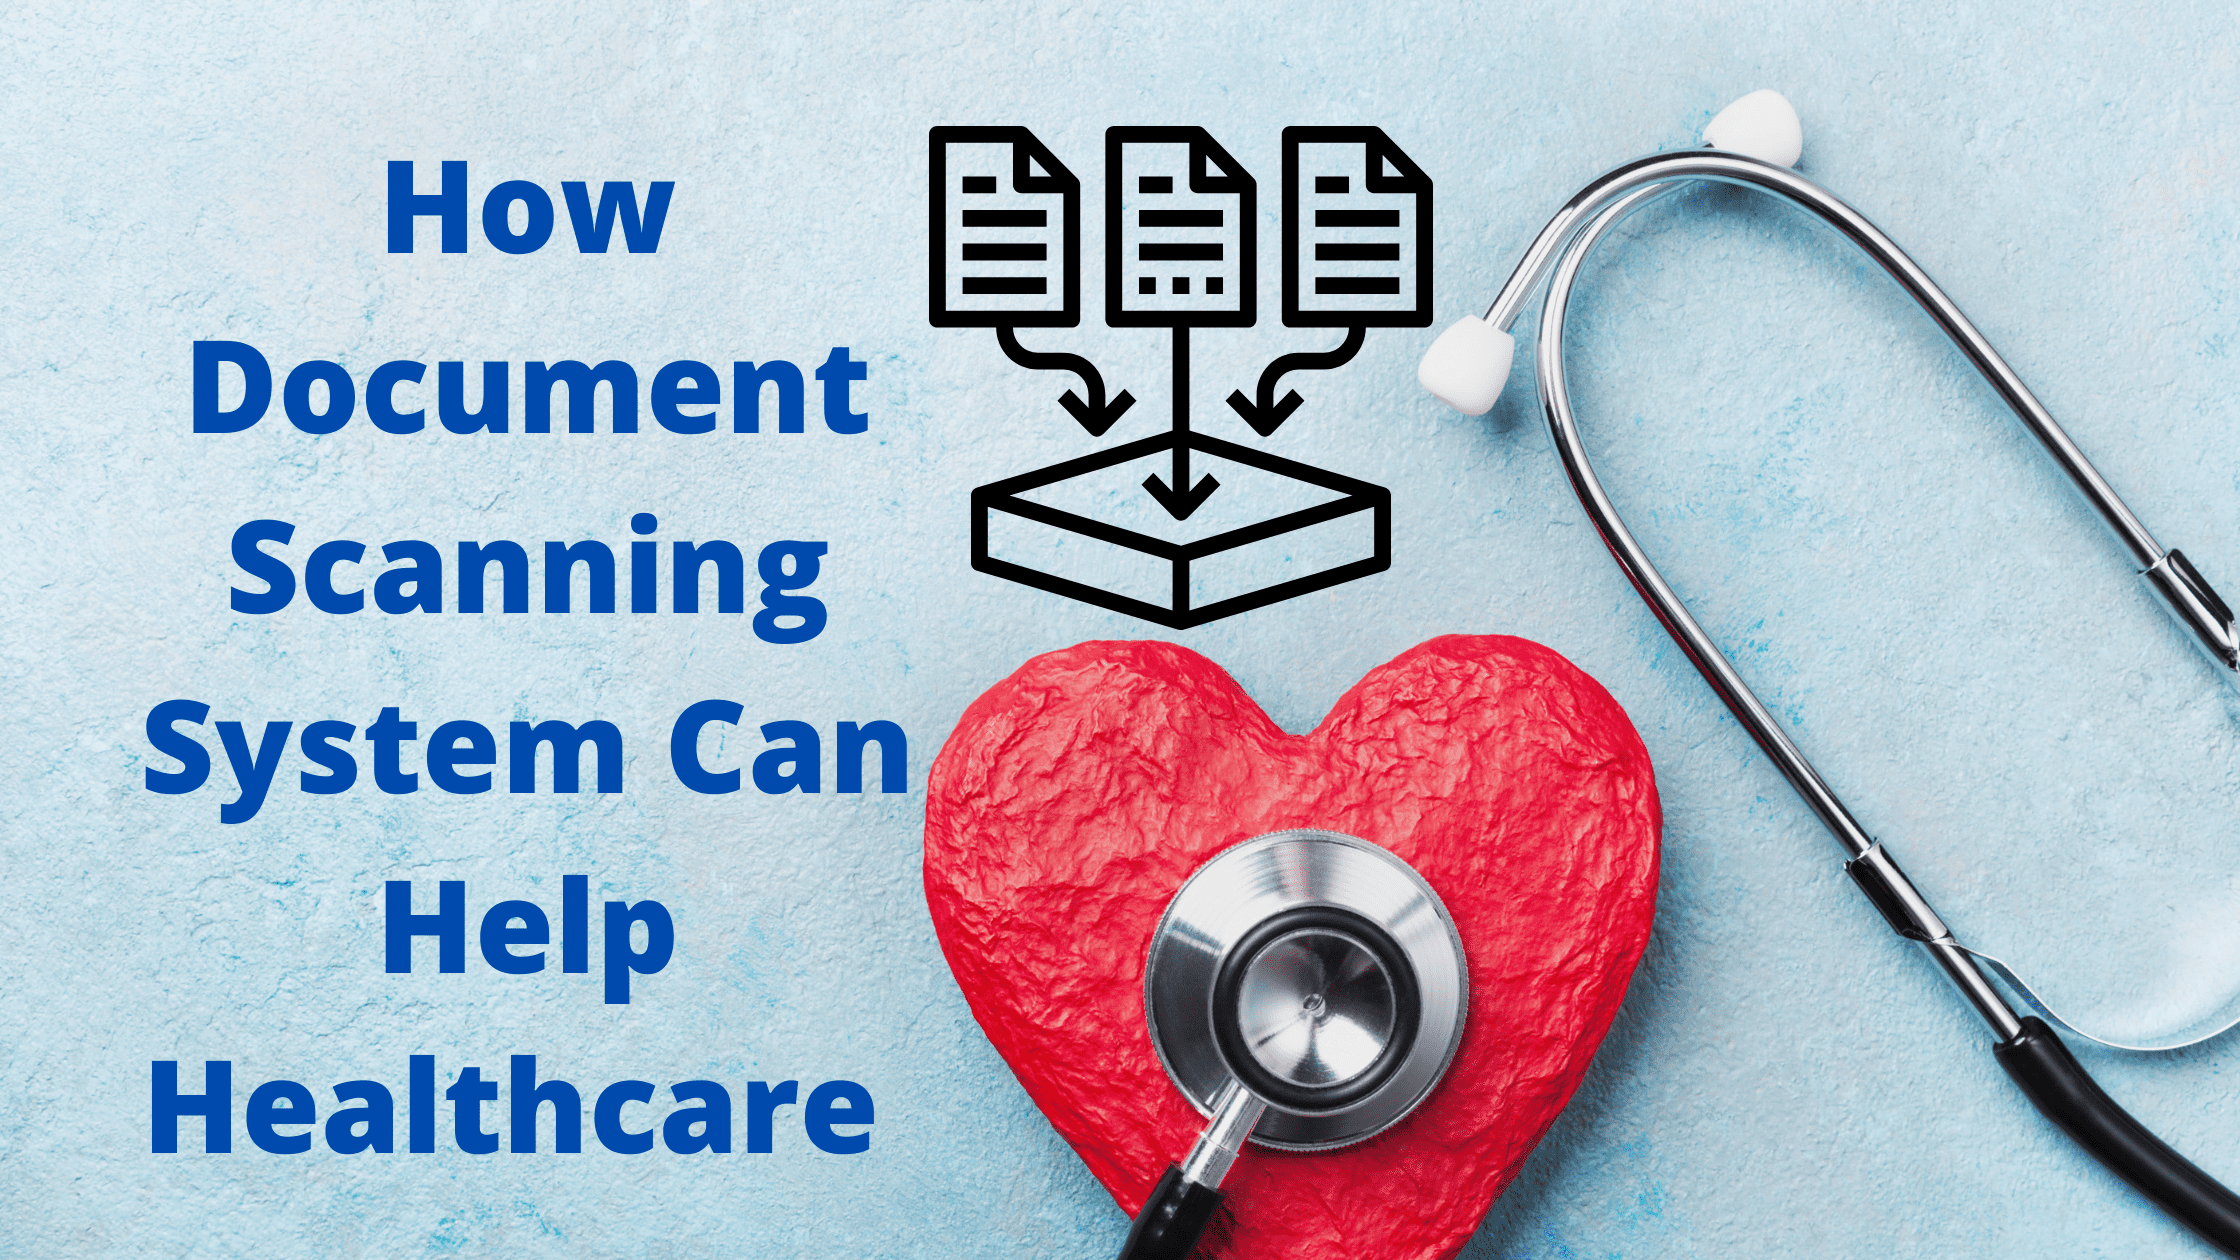 Document Scanning System Can Help Healthcare